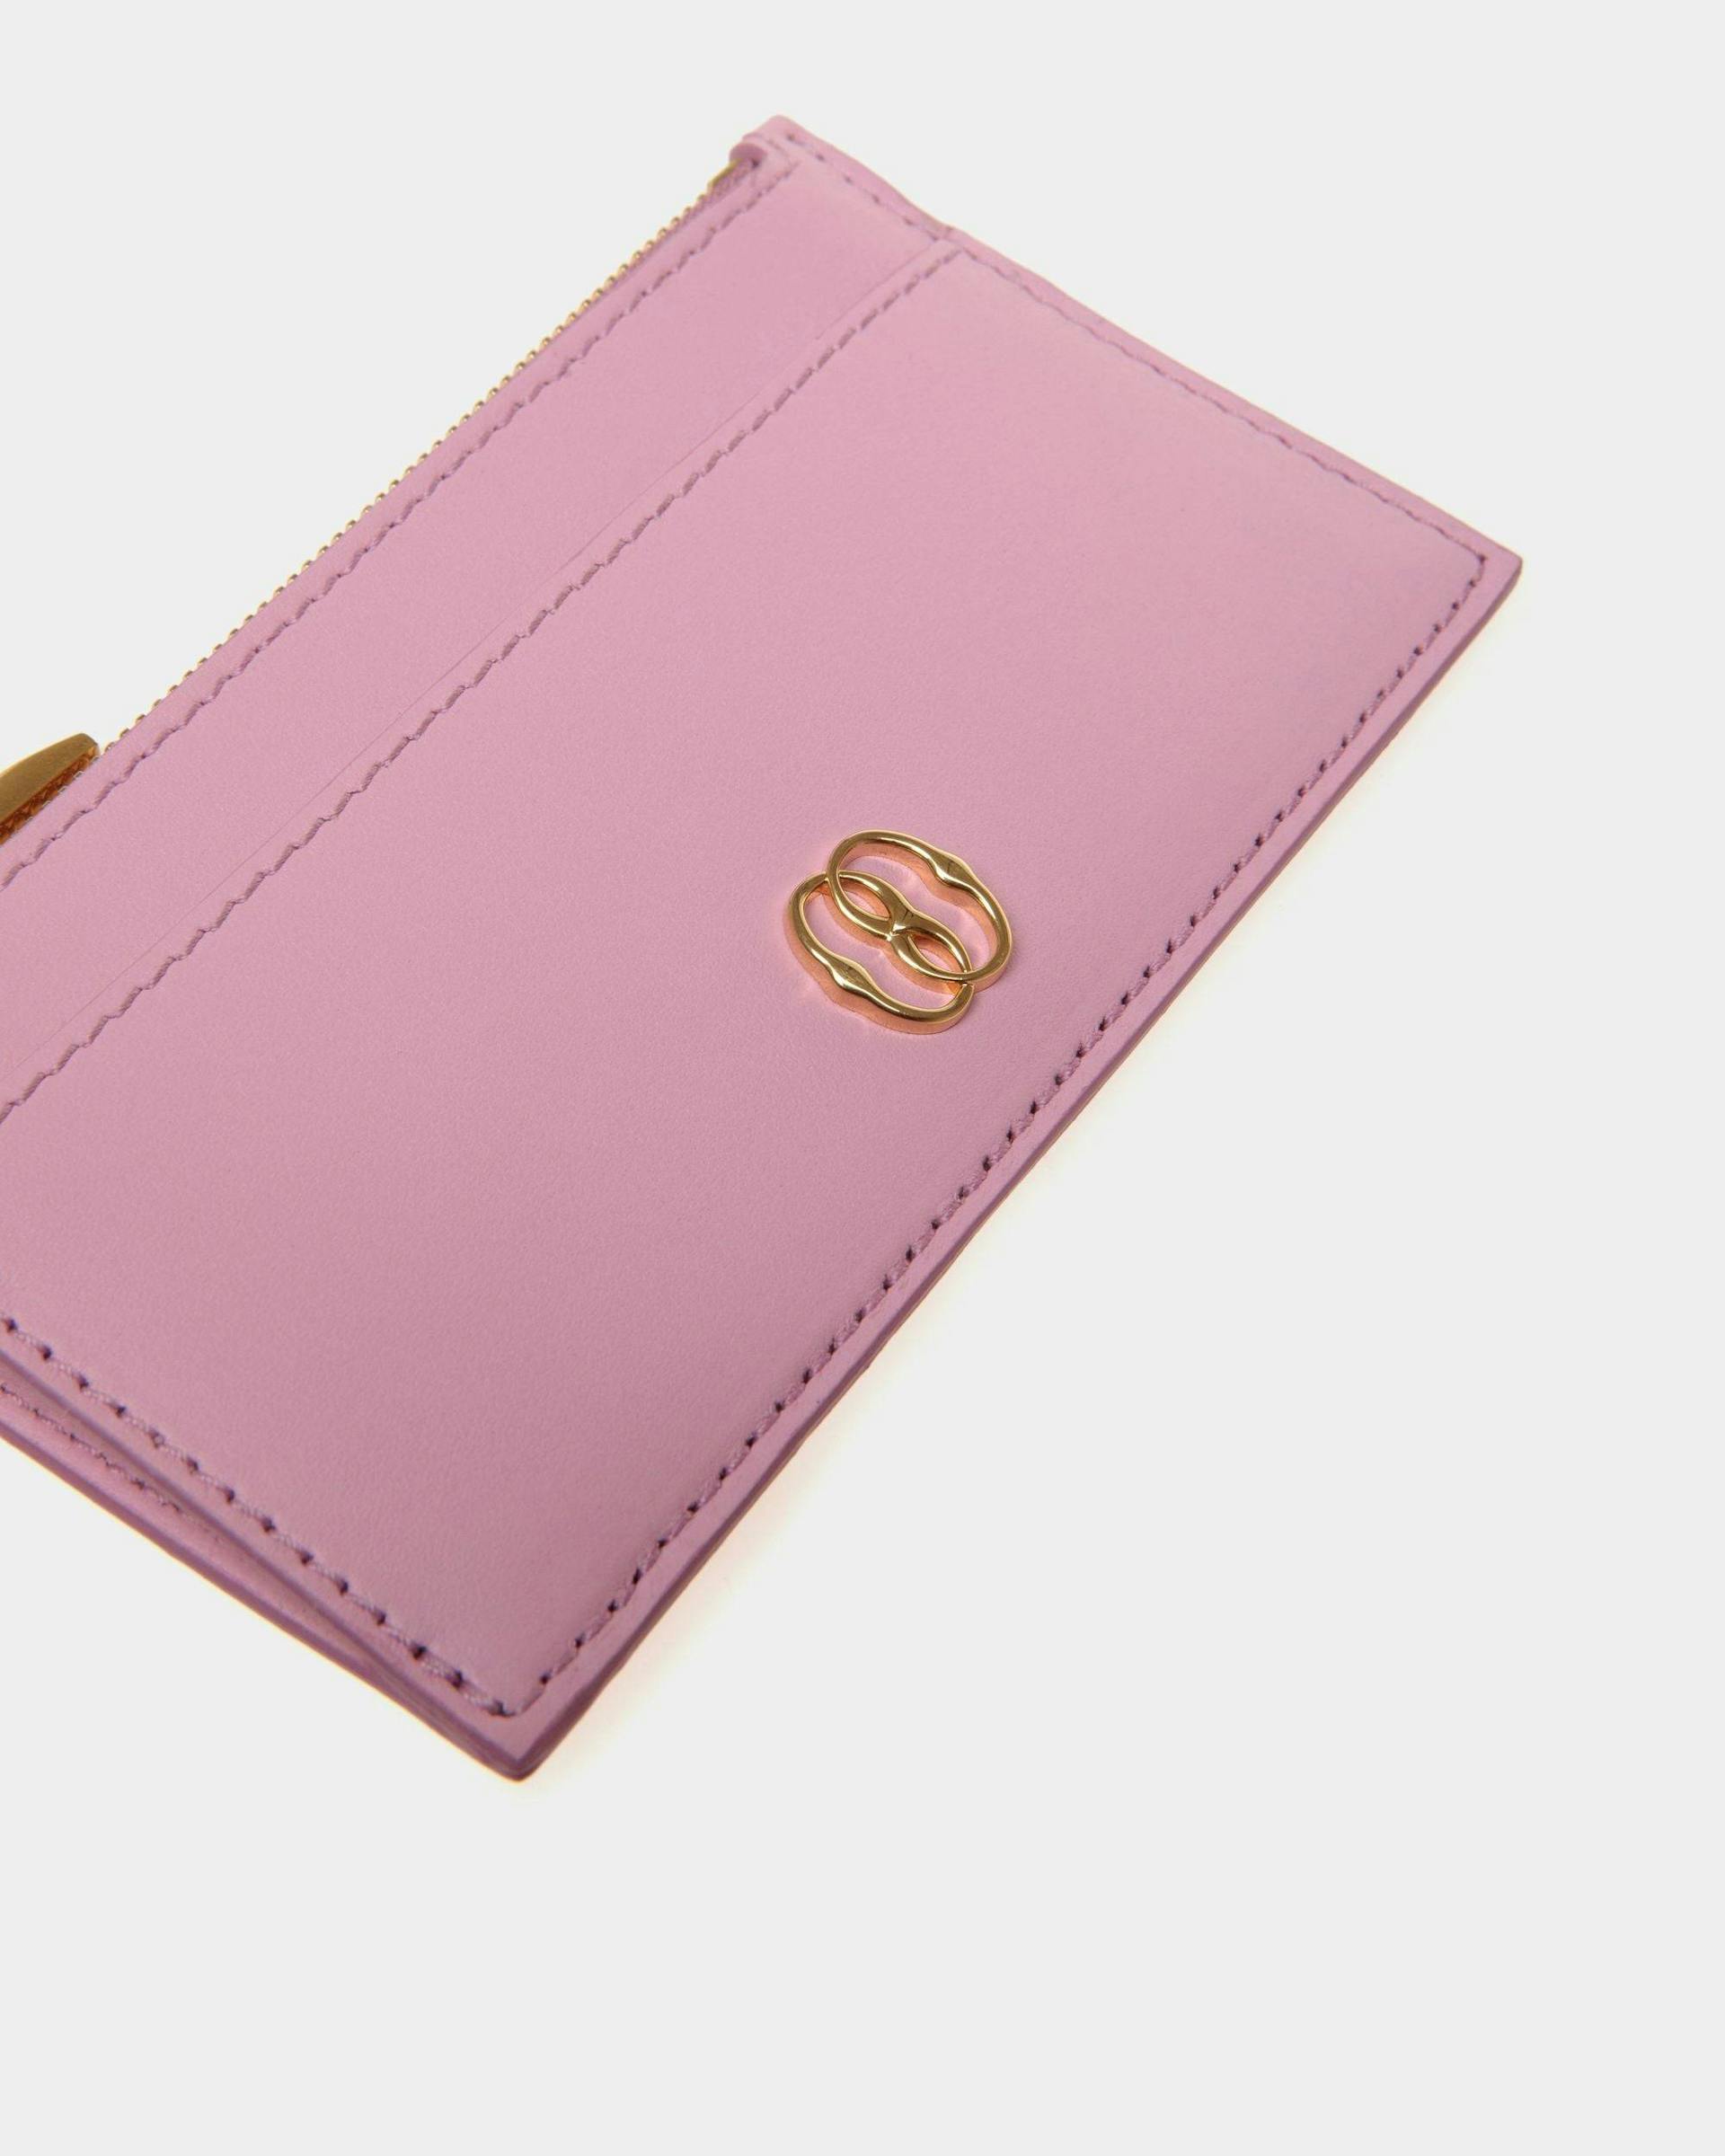 Women's Emblem Zipped Card Holder in Pink Leather | Bally | Still Life Detail